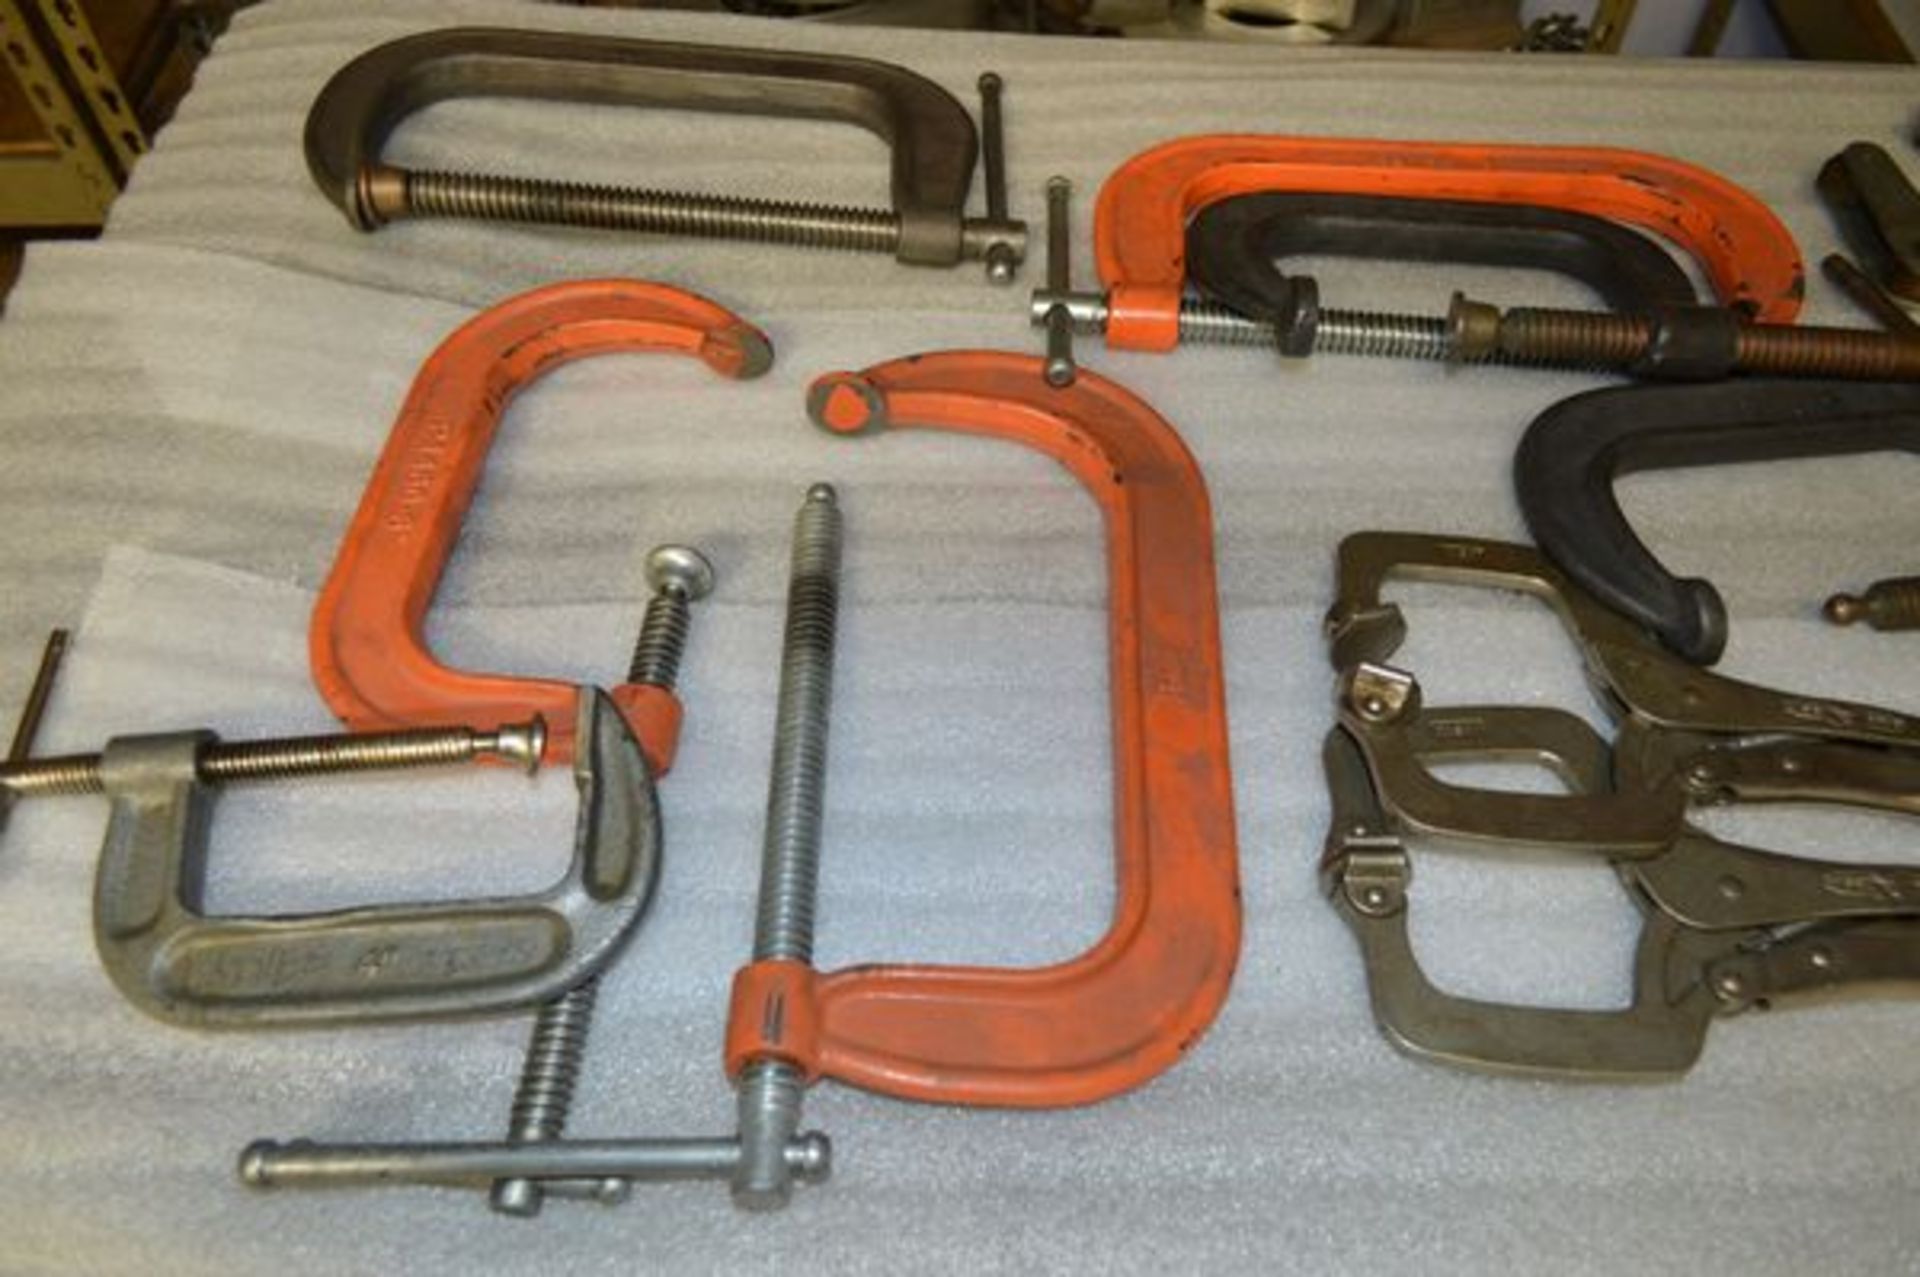 Box of Heavy Duty C Clamps and Vise Grips